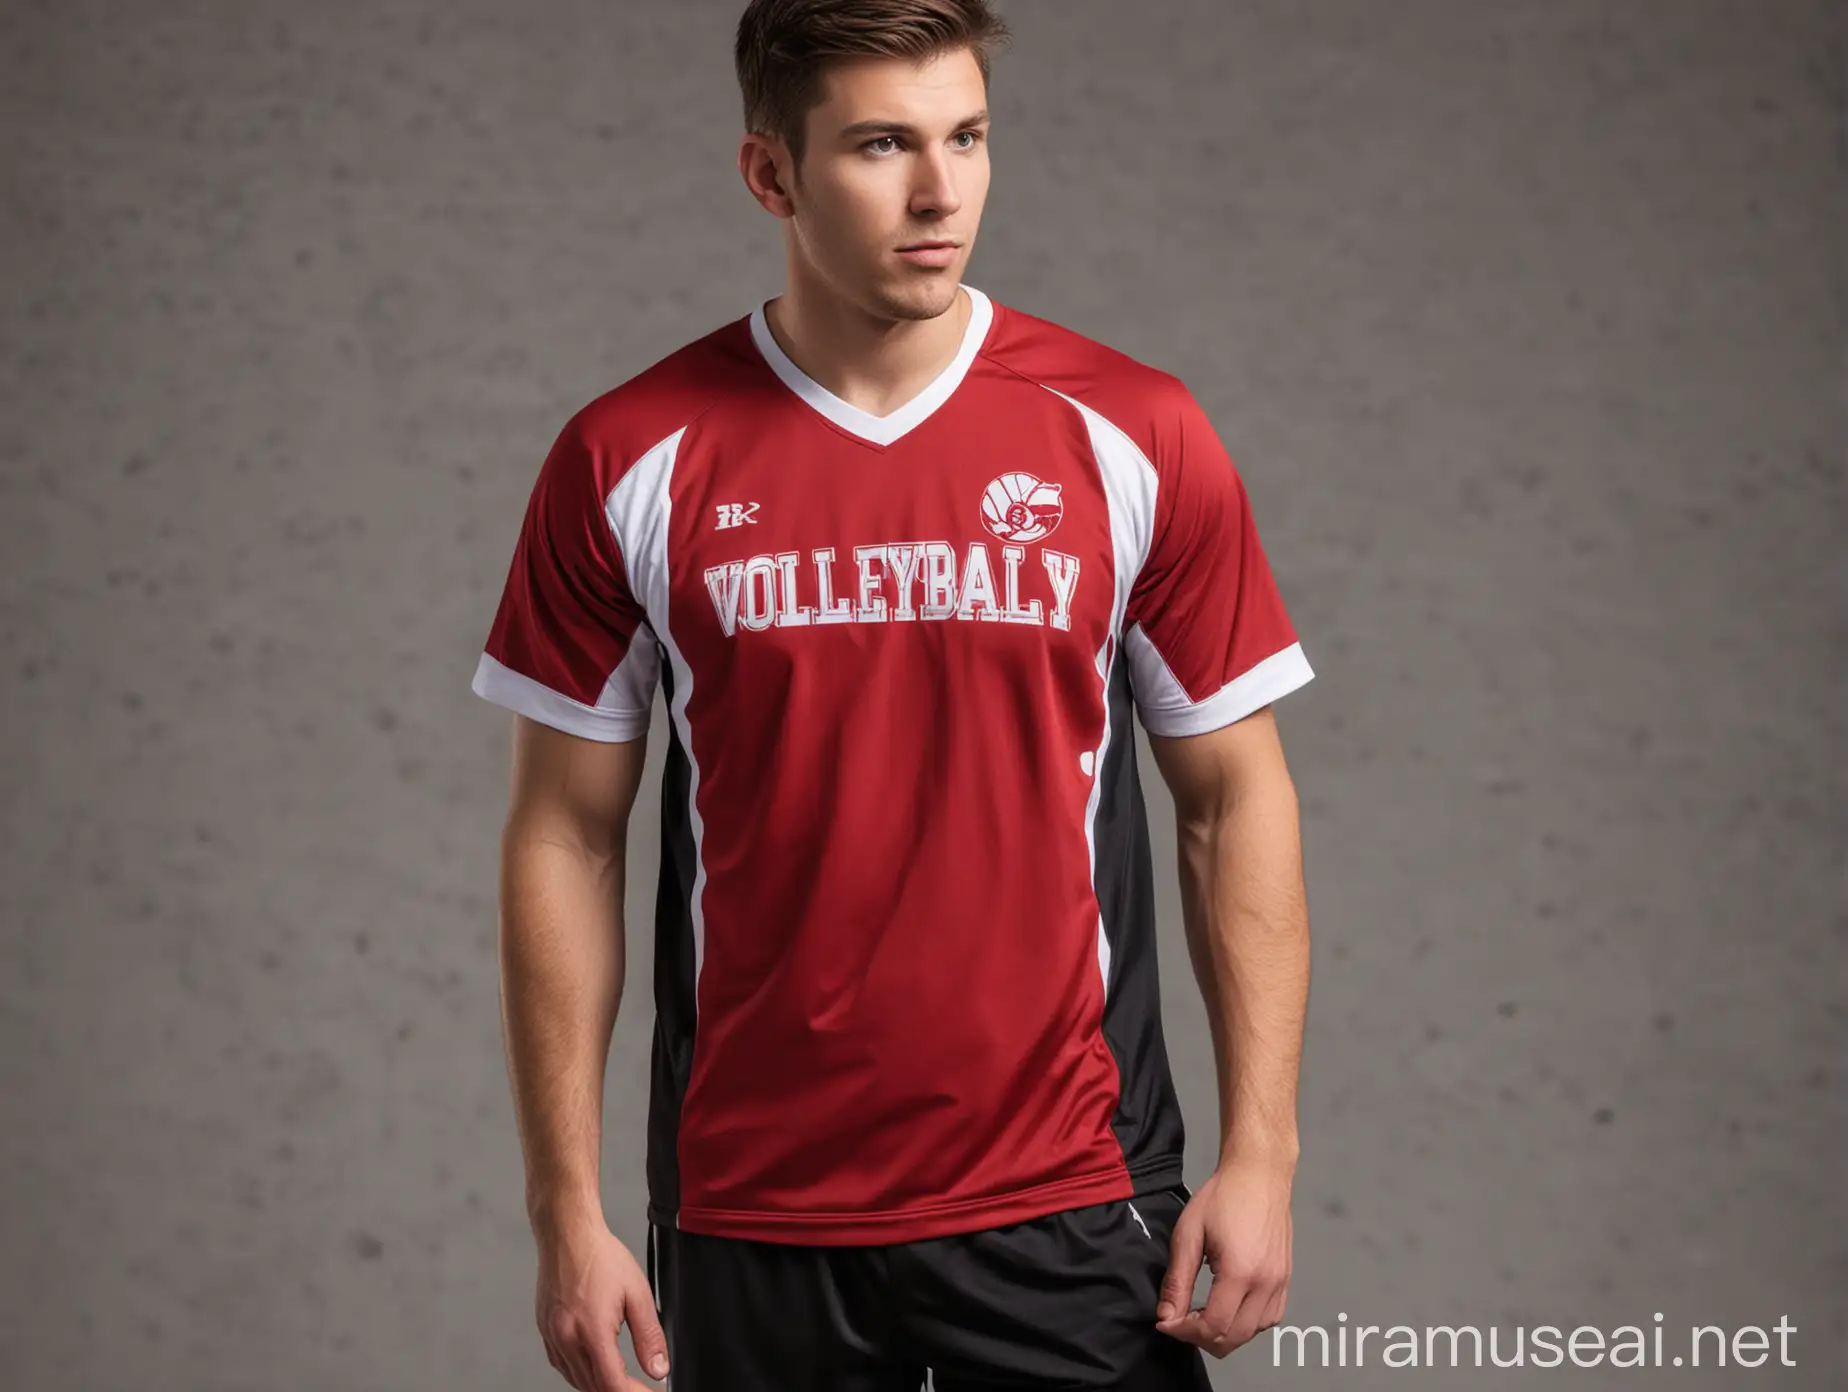 men's volleyball coach uniform with red and white colors tshirt